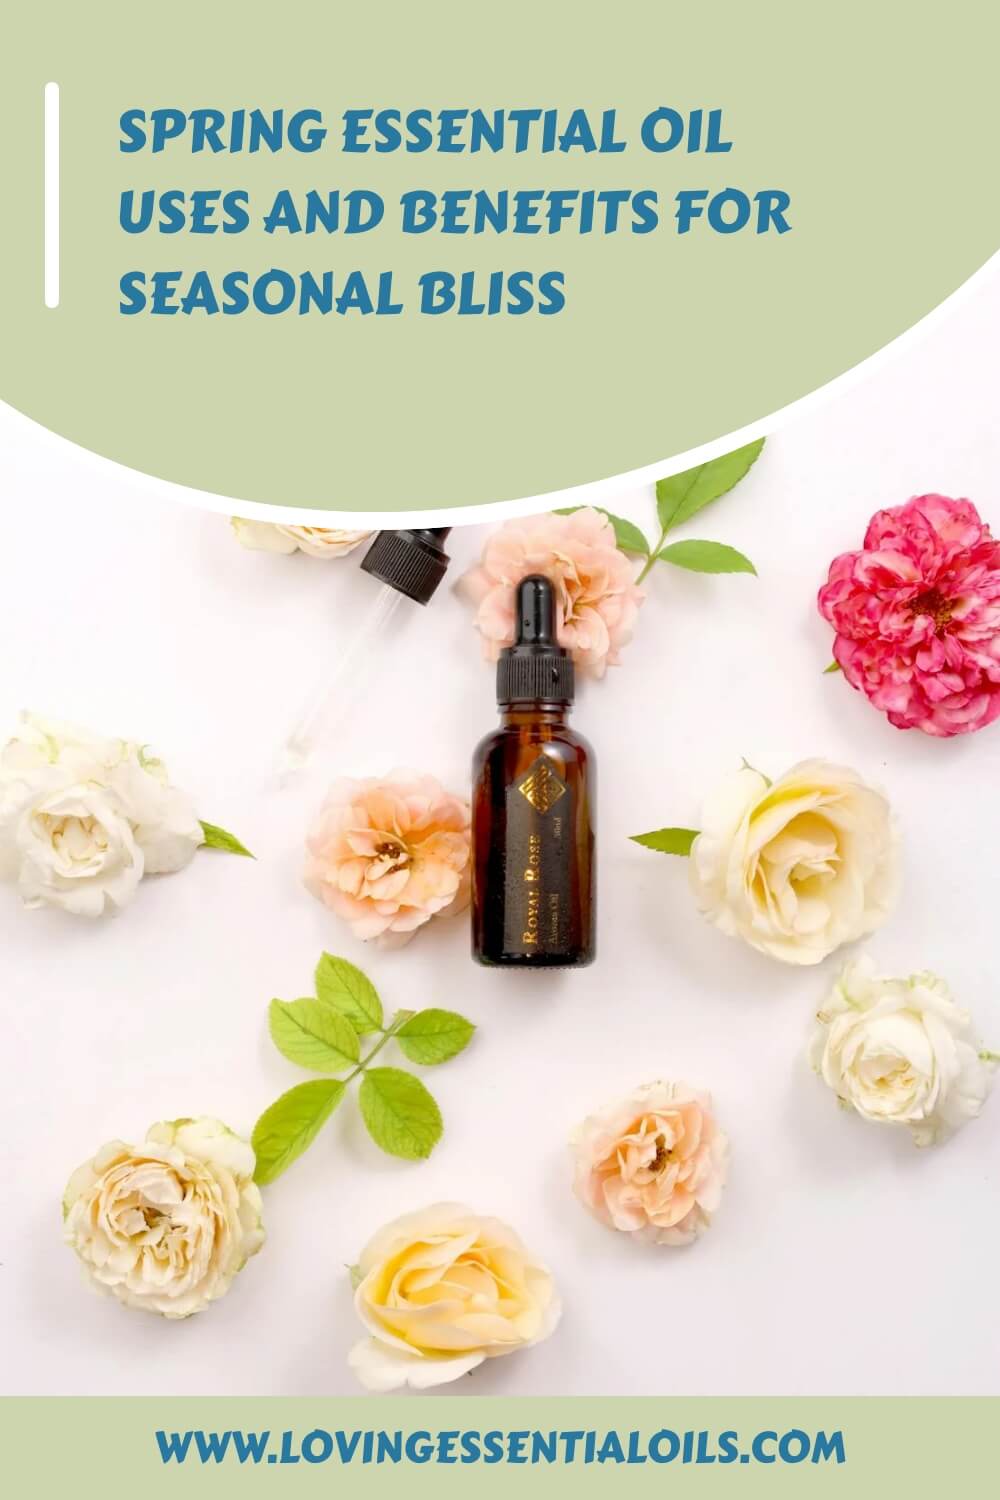 Spring Essential Oil Benefits by Loving Essential Oils